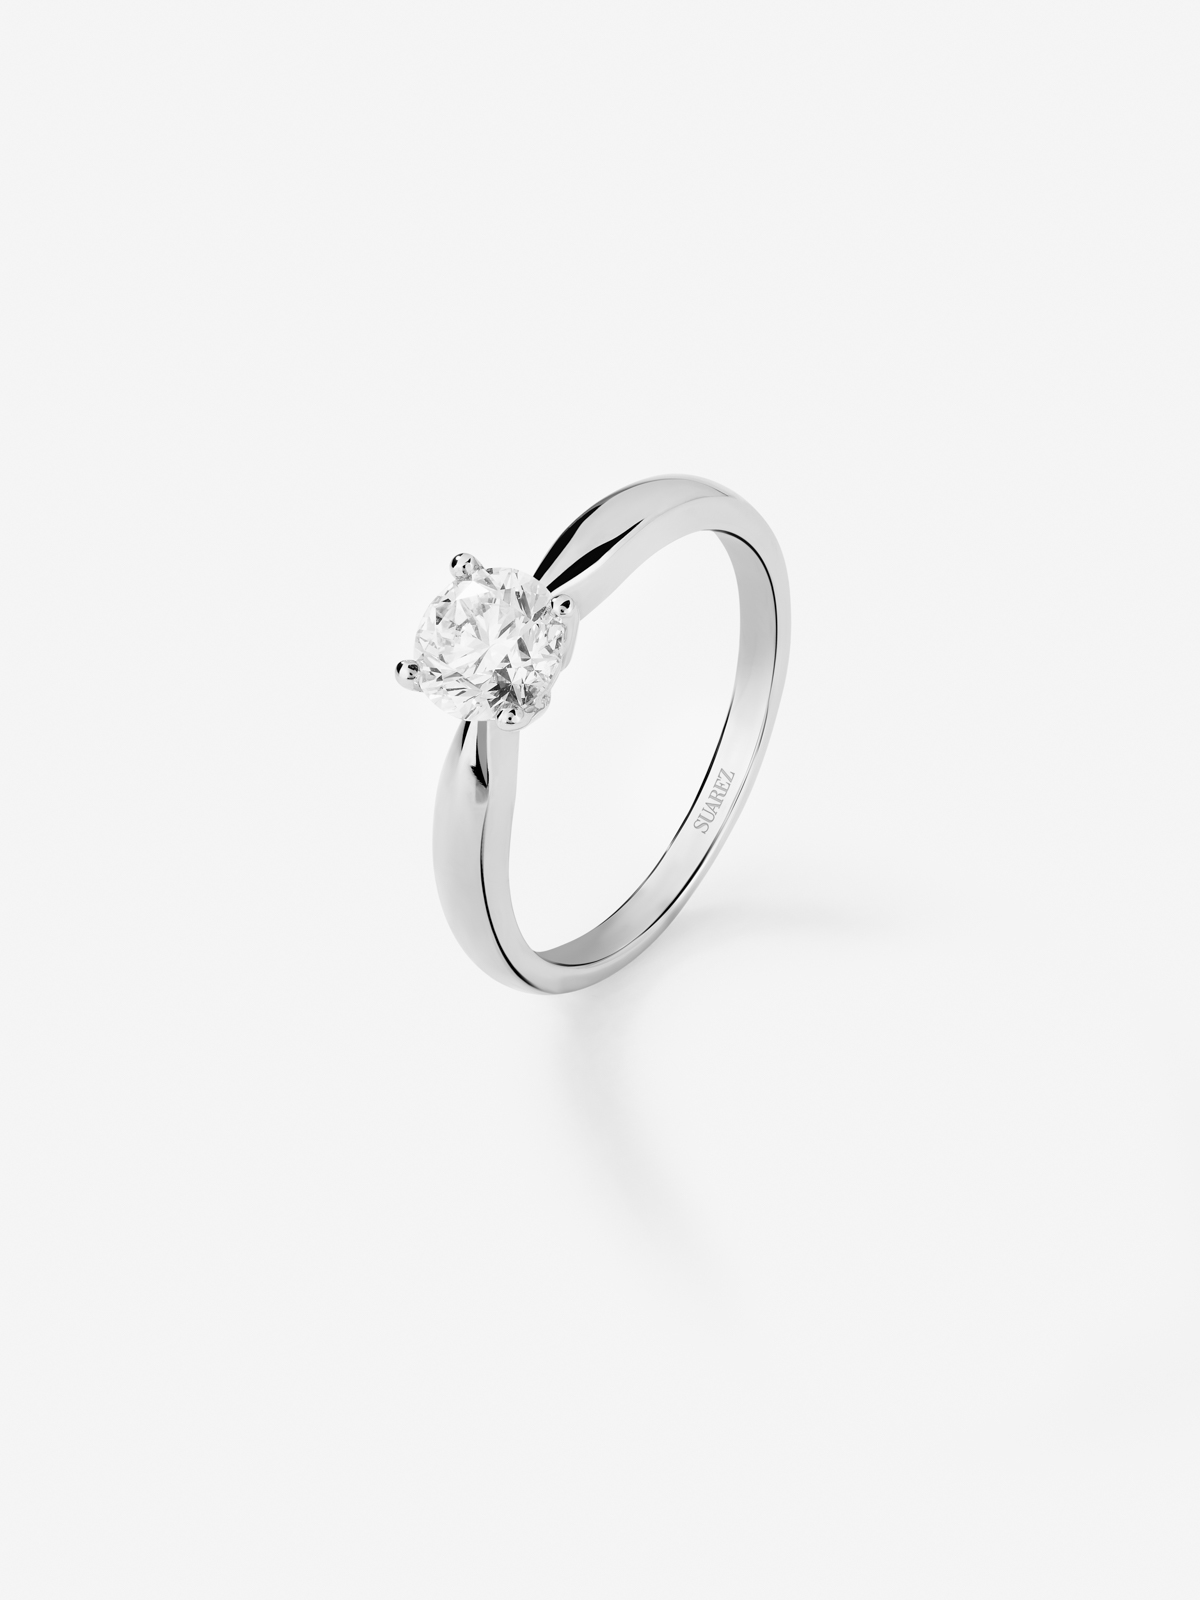 18K White Gold Solitaire Engagement Ring with Diamond